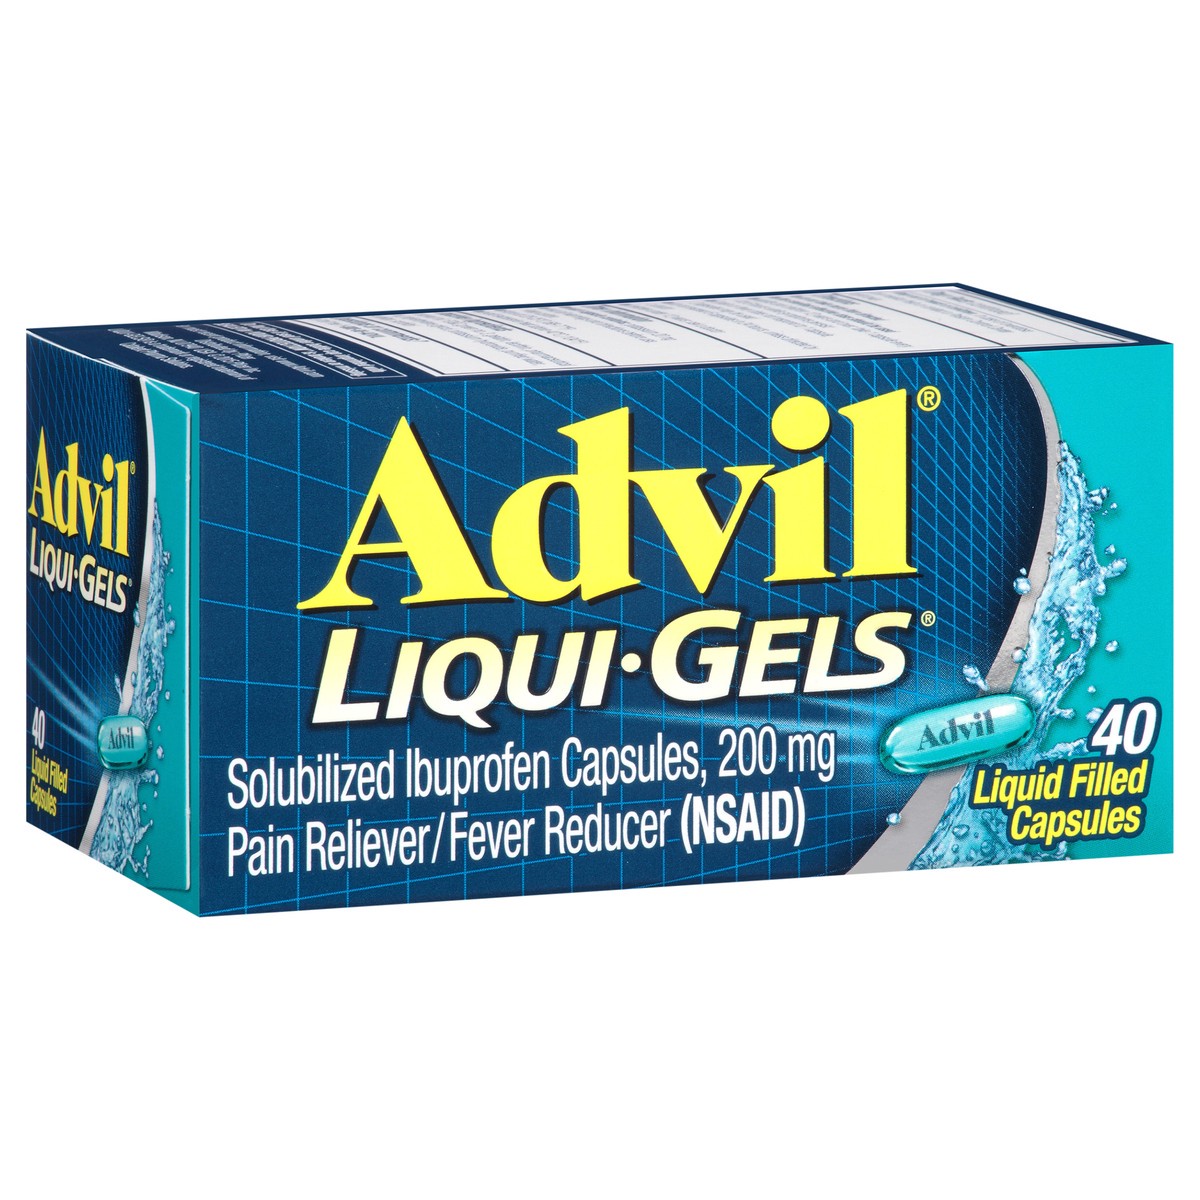 slide 2 of 9, Advil Liqui-Gels Pain Reliever and Fever Reducer, Ibuprofen 200mg for Pain Relief - 40 Liquid Filled Capsules, 40 ct